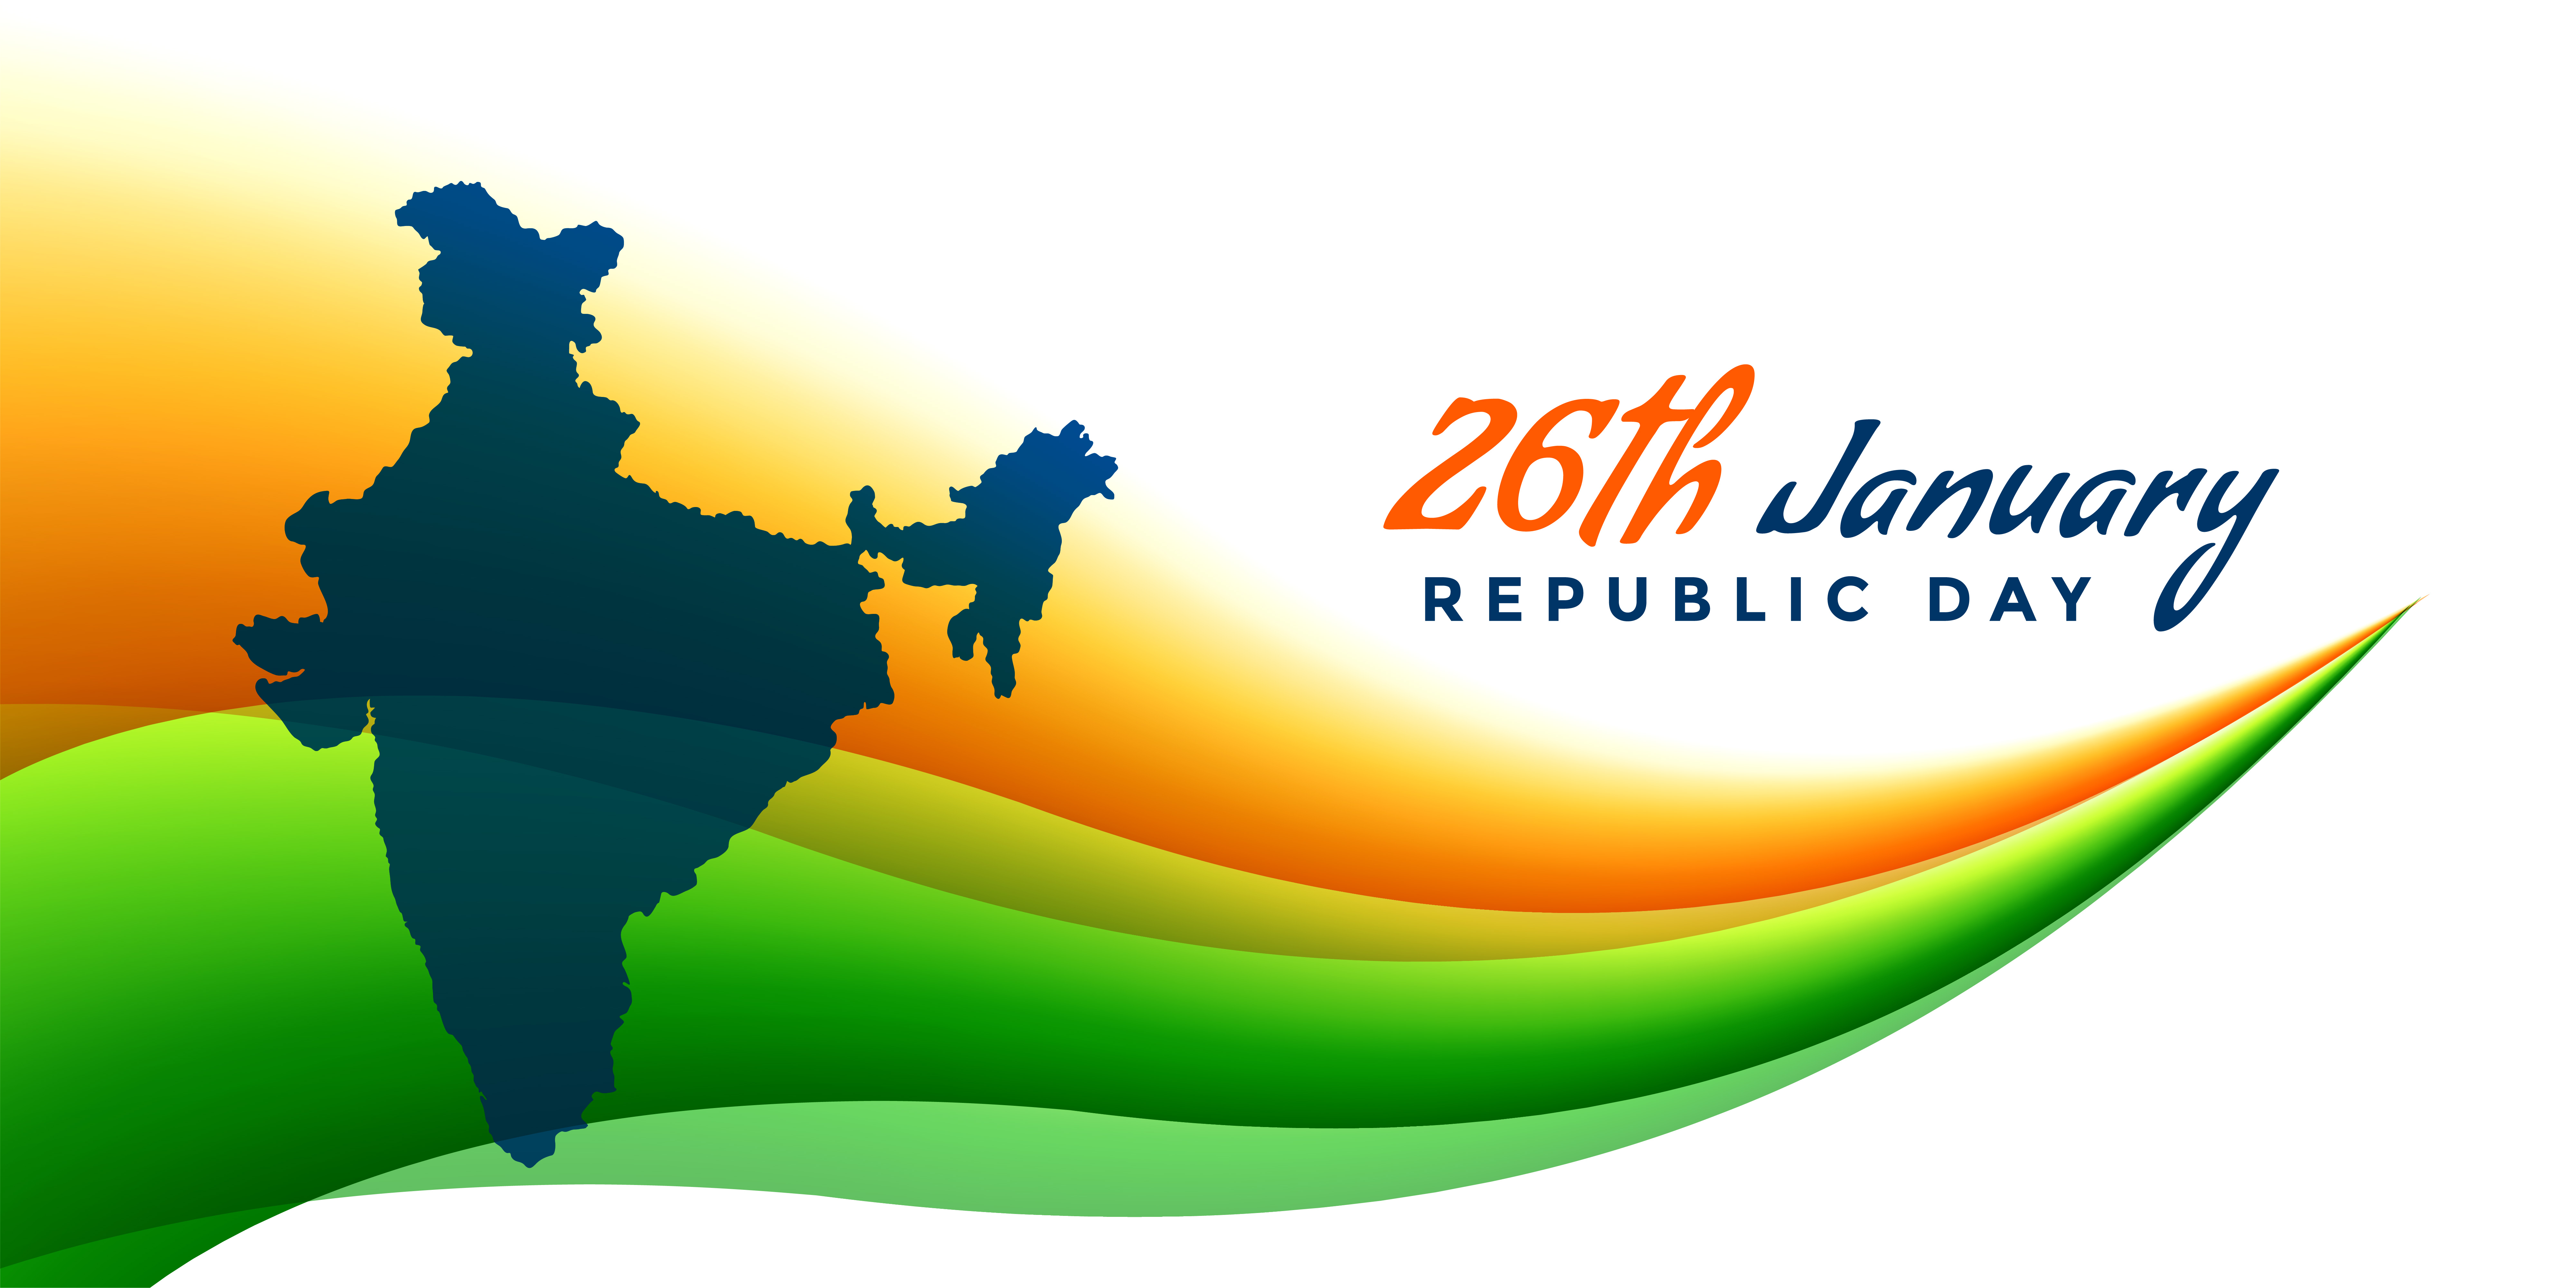 26th january republic day banner with map of india - Download Free ...